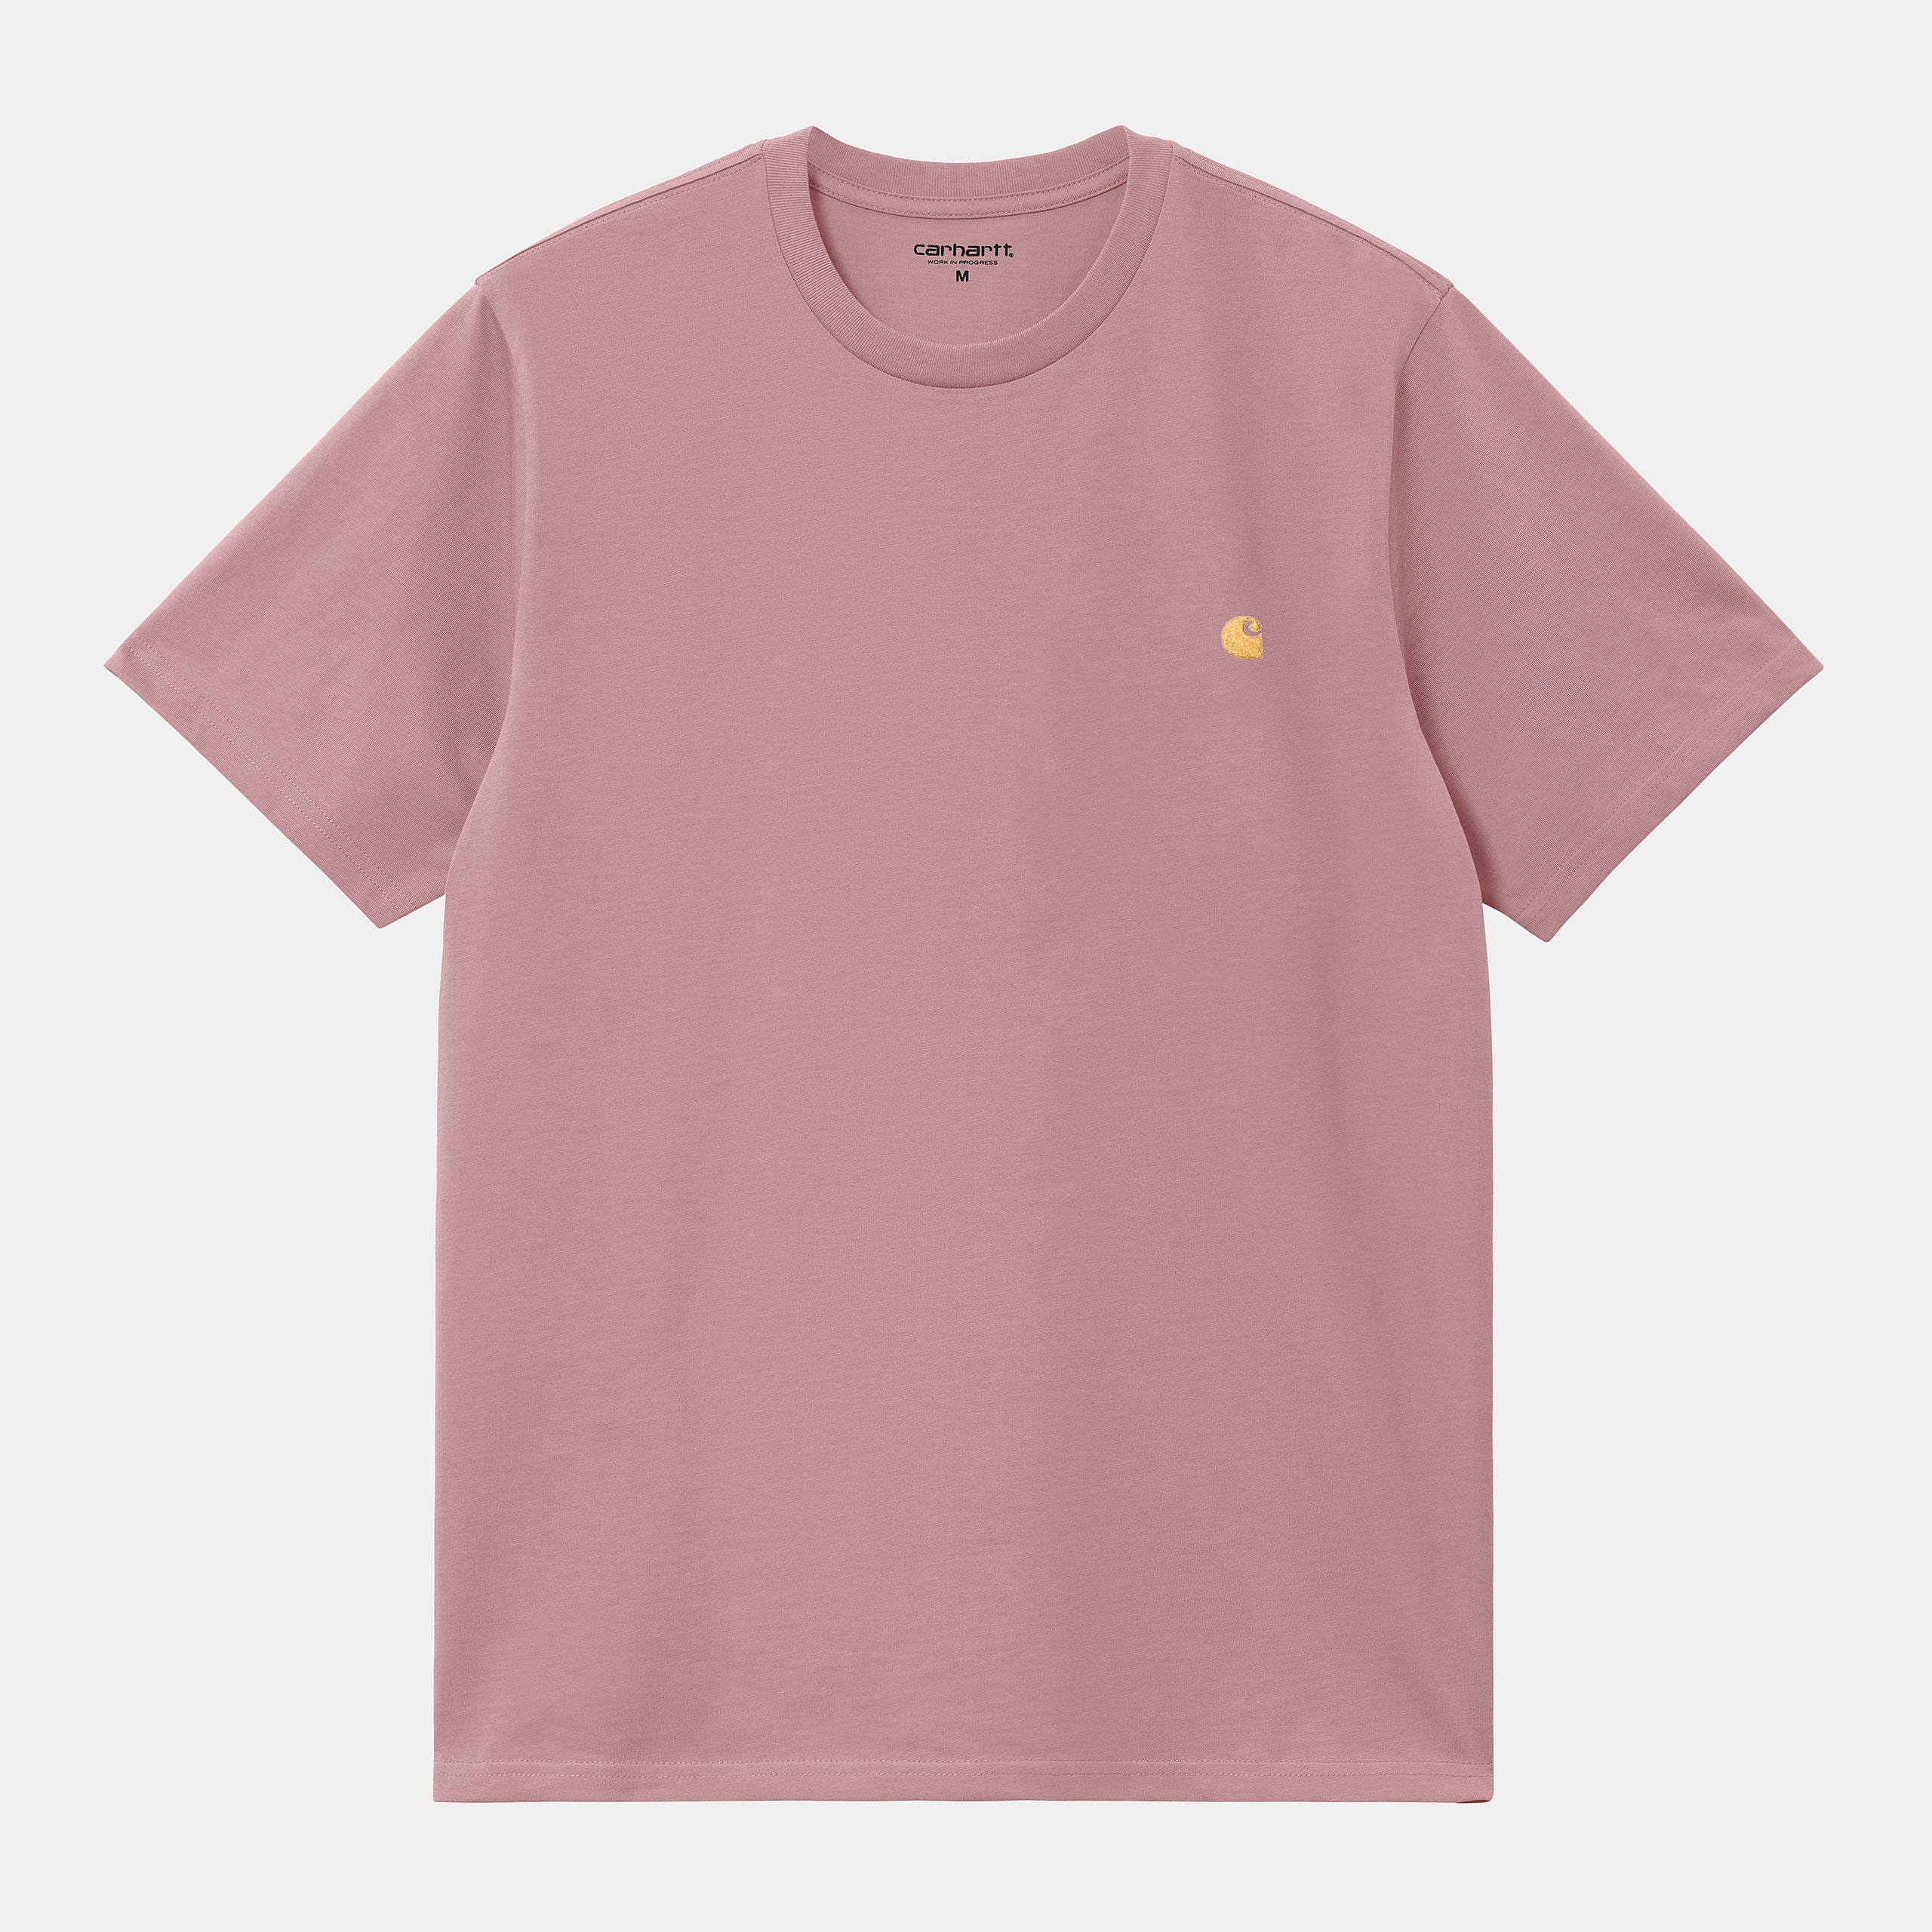 Carhartt WIP S/S Chase T-Shirt, Glassy Pink/Gold